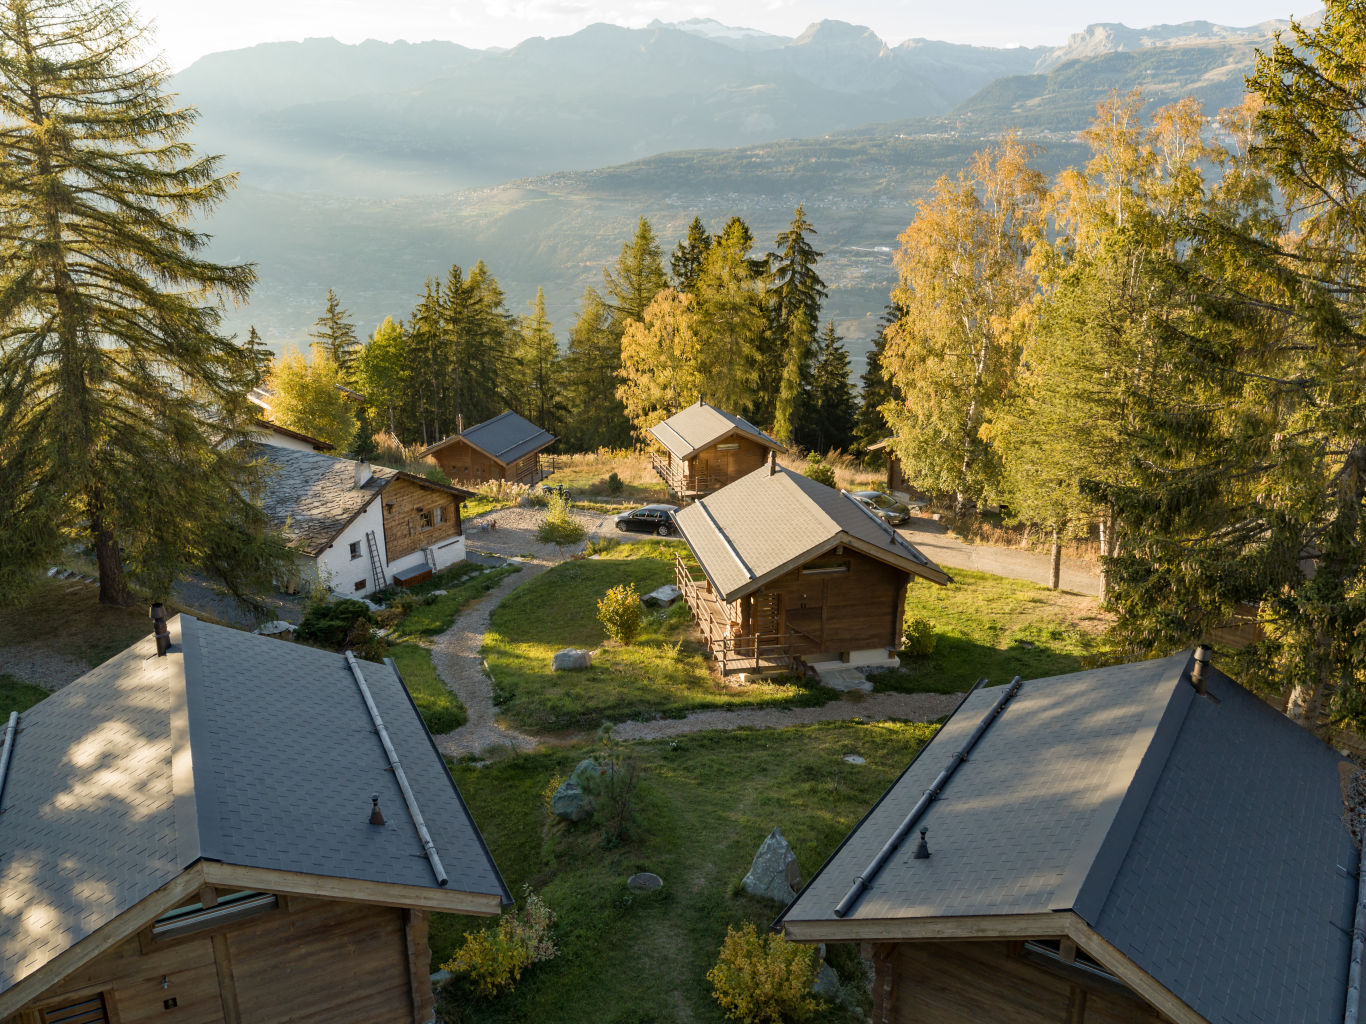 Spend an authentic stay in one of the chalets that together make up this exclusive hamlet in the middle of protected nature, Valais, Switzerland